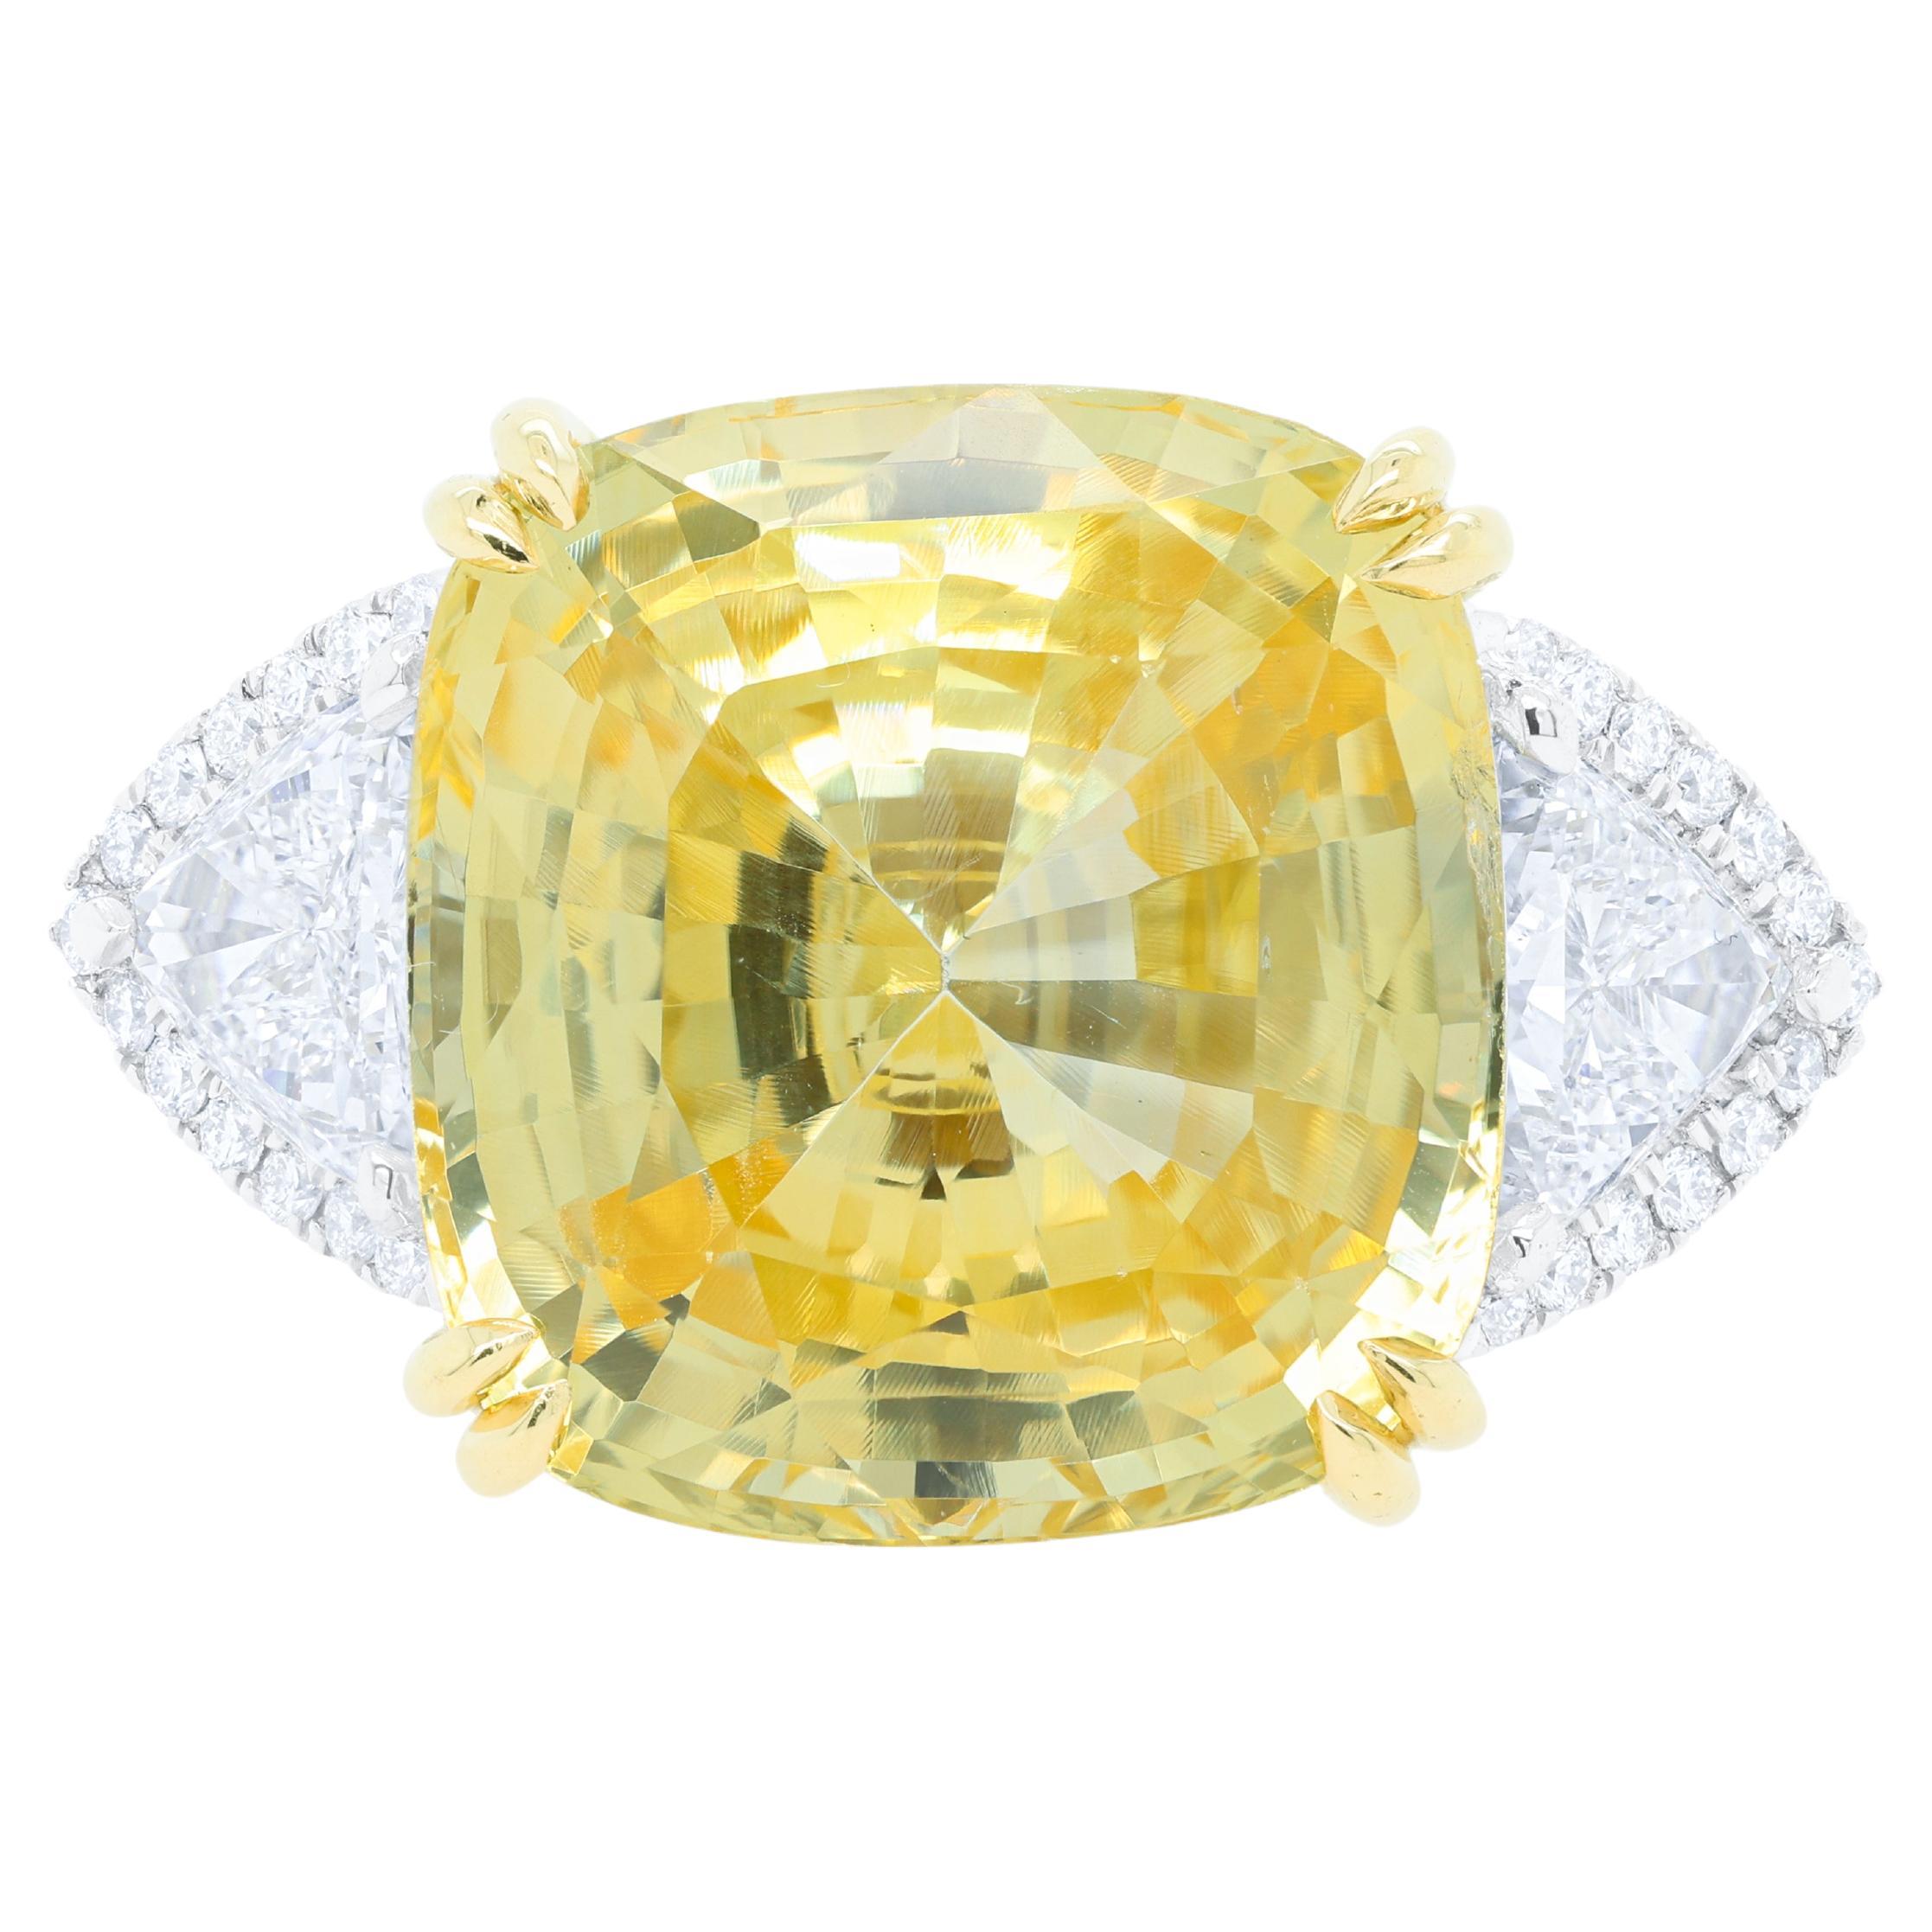 Diana M. 23.33ct No Heat Yellow Sapphire Sri Lanka With Trilliant 2.00cts Plat For Sale